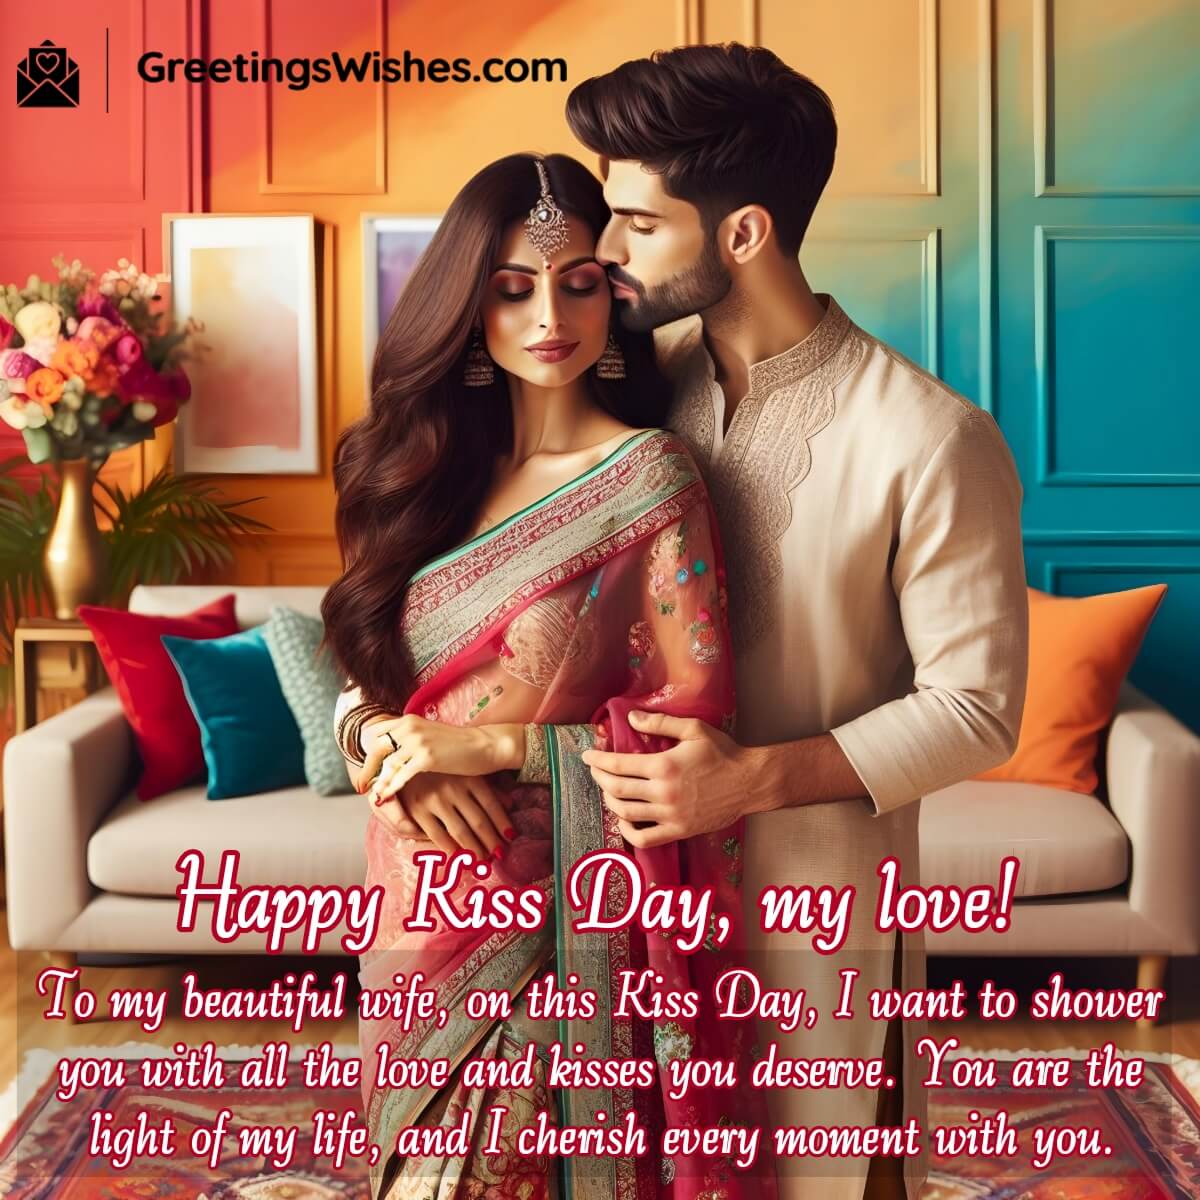 Kiss Day Wishes For Wife